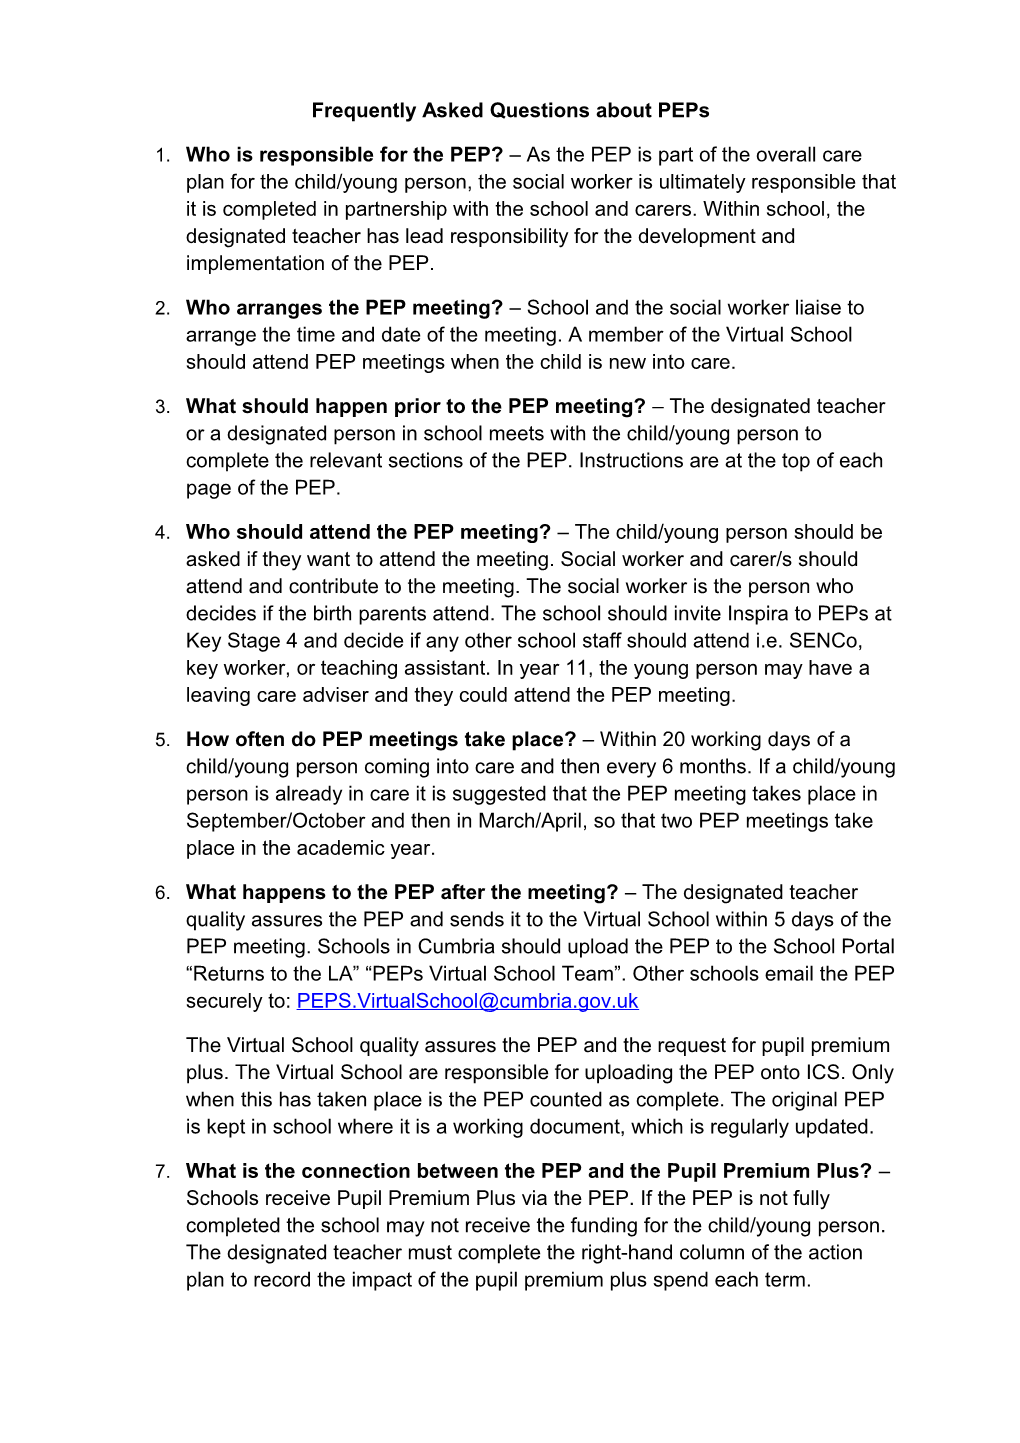 Frequently Asked Questions About Peps